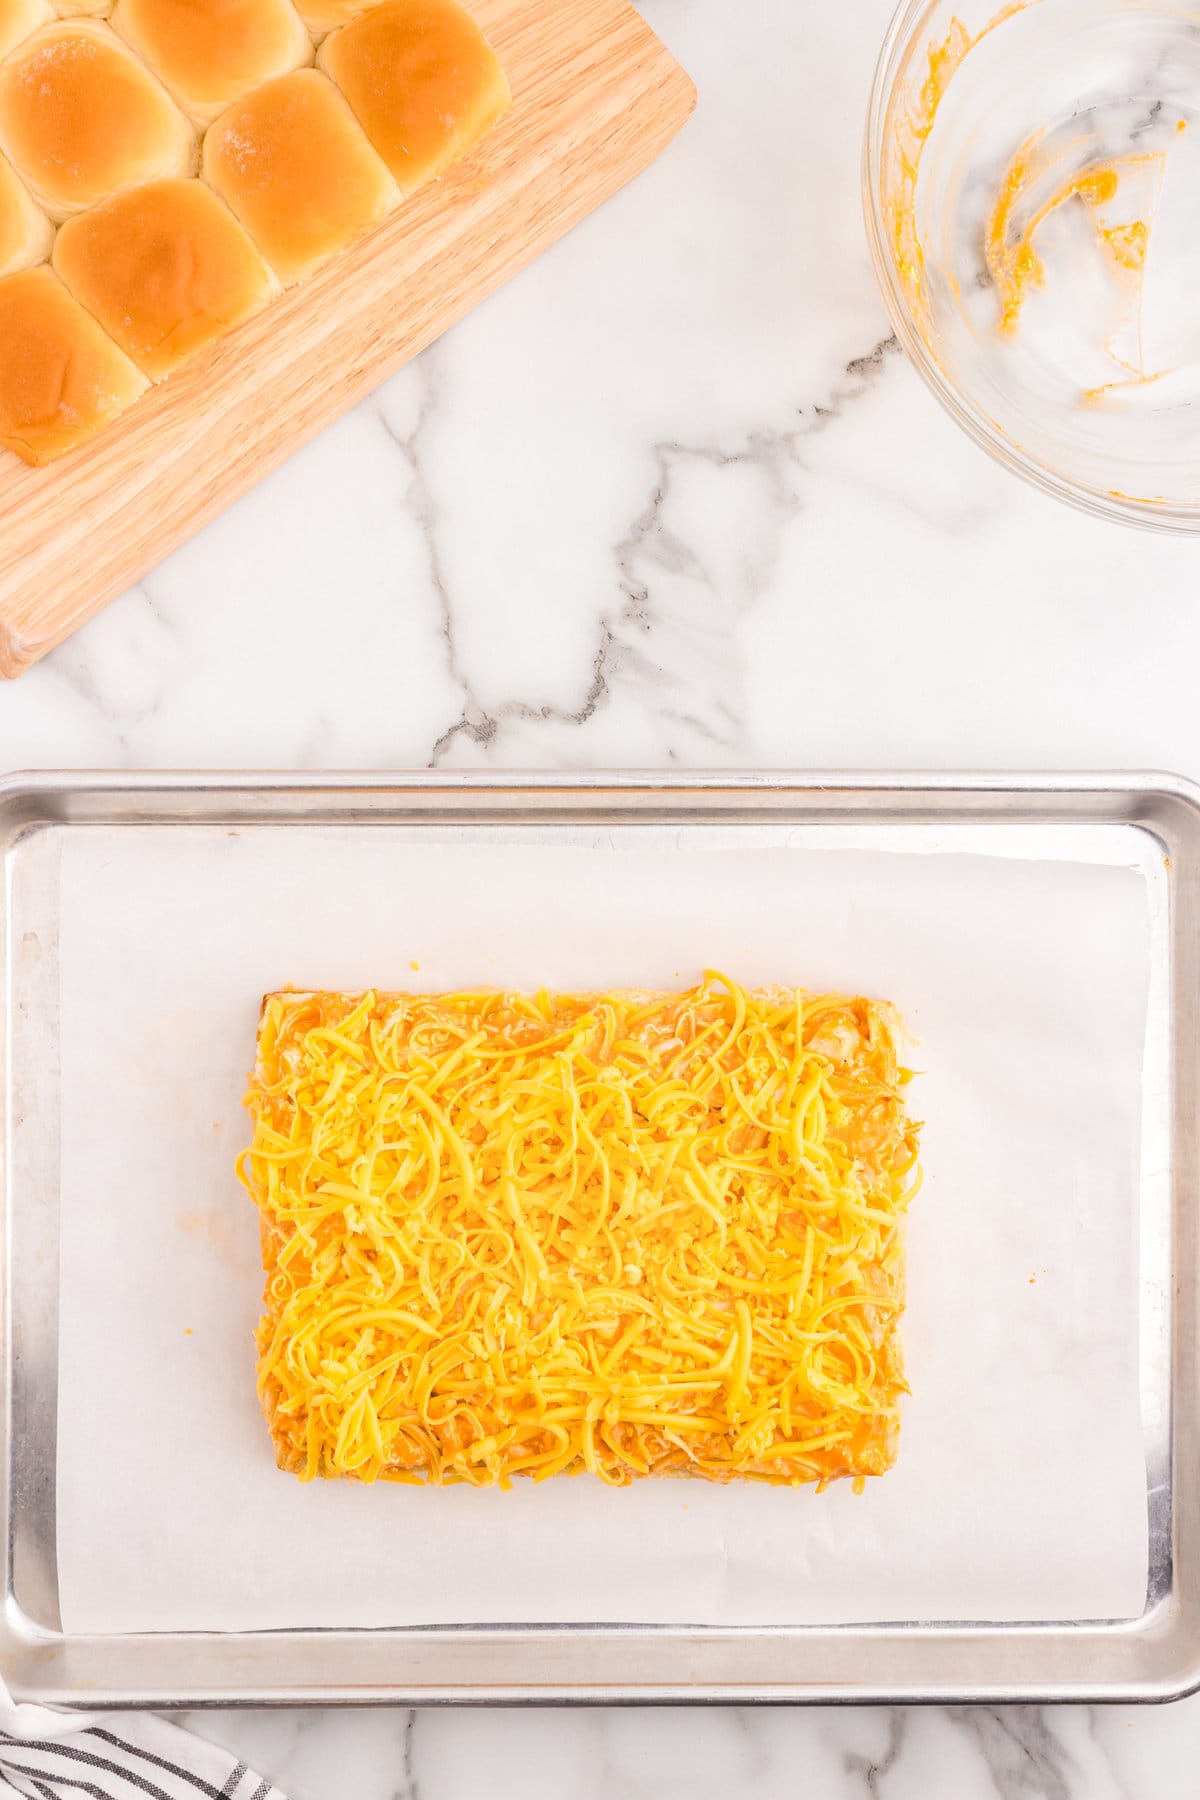 Adding shredded cheese to chicken mixture for Buffalo Chicken Sliders recipe